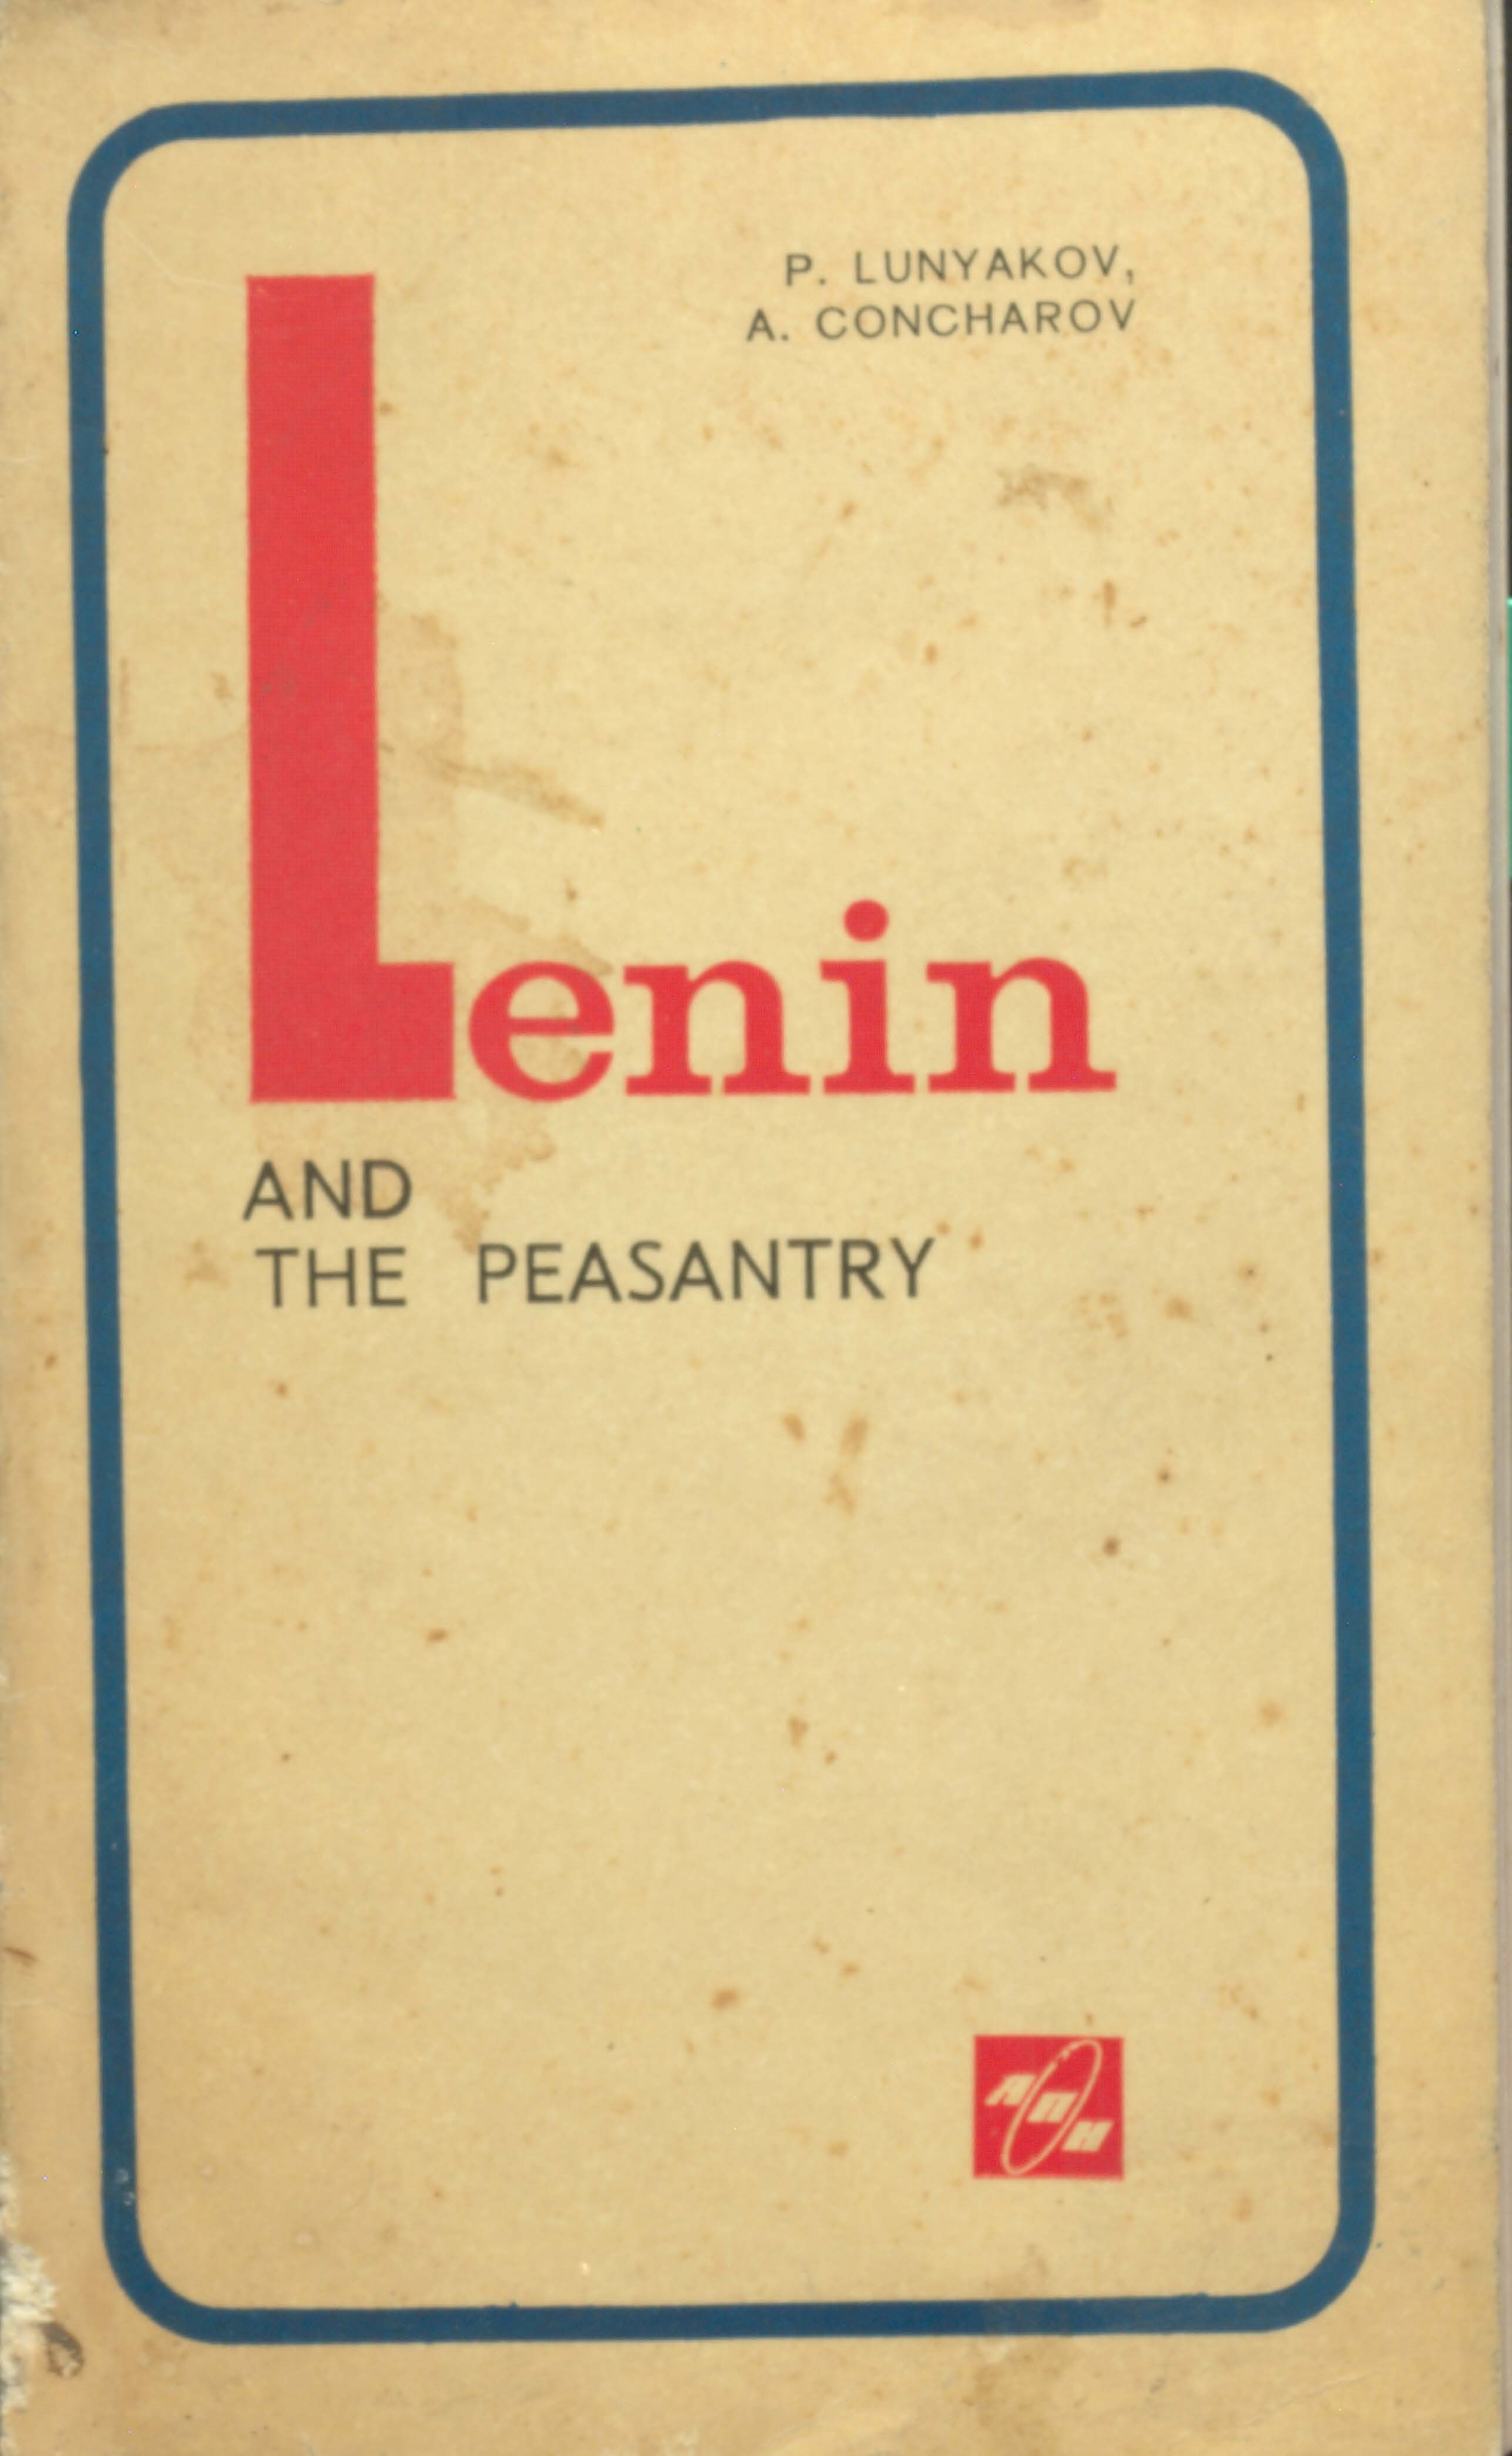 Lenin and the peasantry